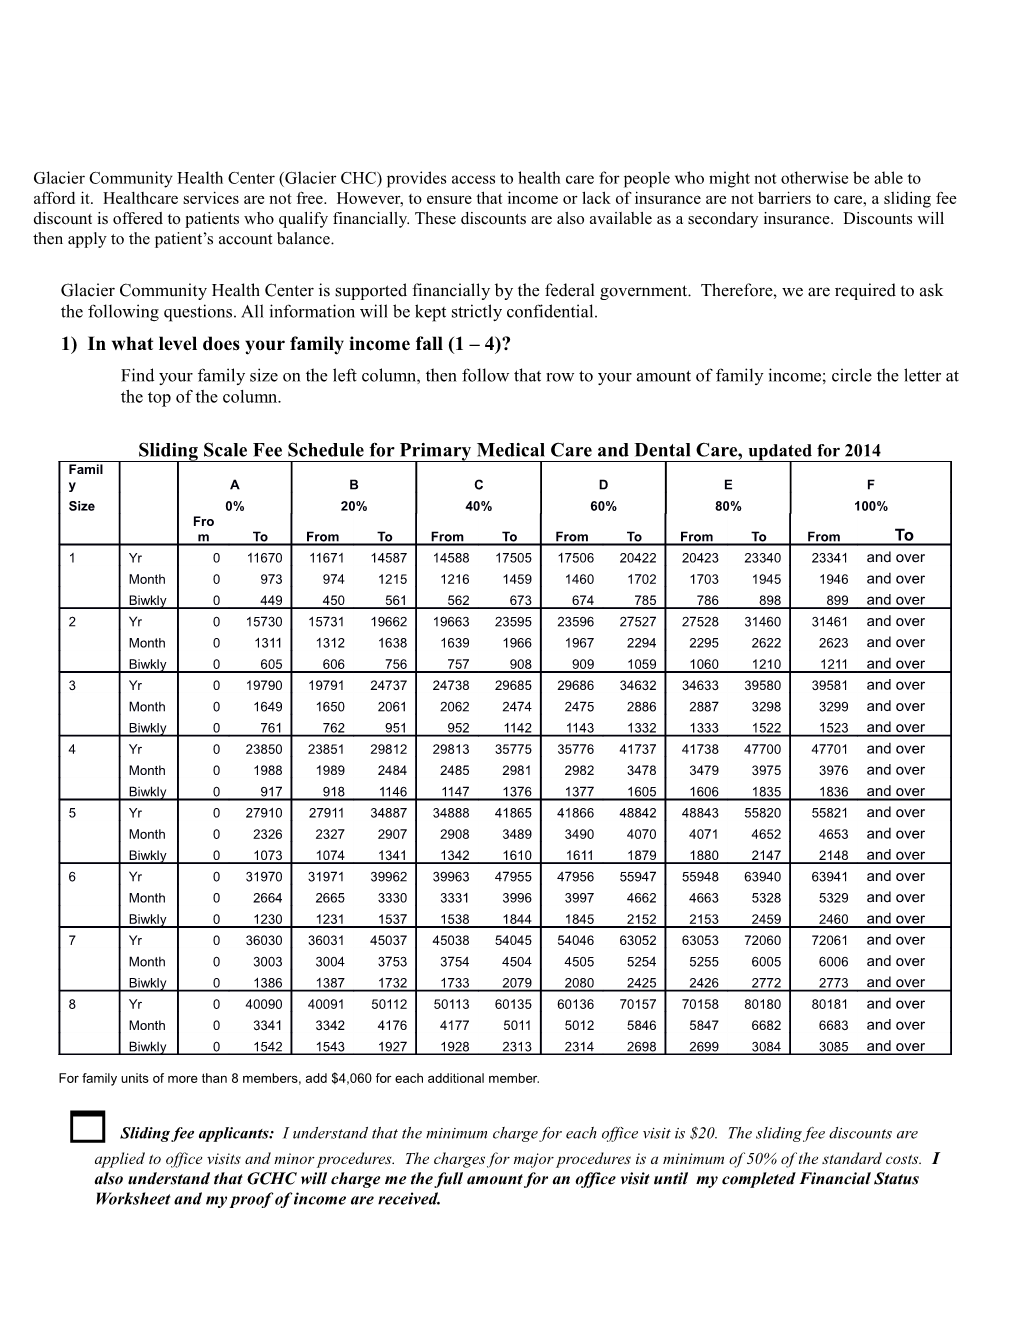 Sliding Scale Fee Schedule for Primary Medical Care, Updated February 2005